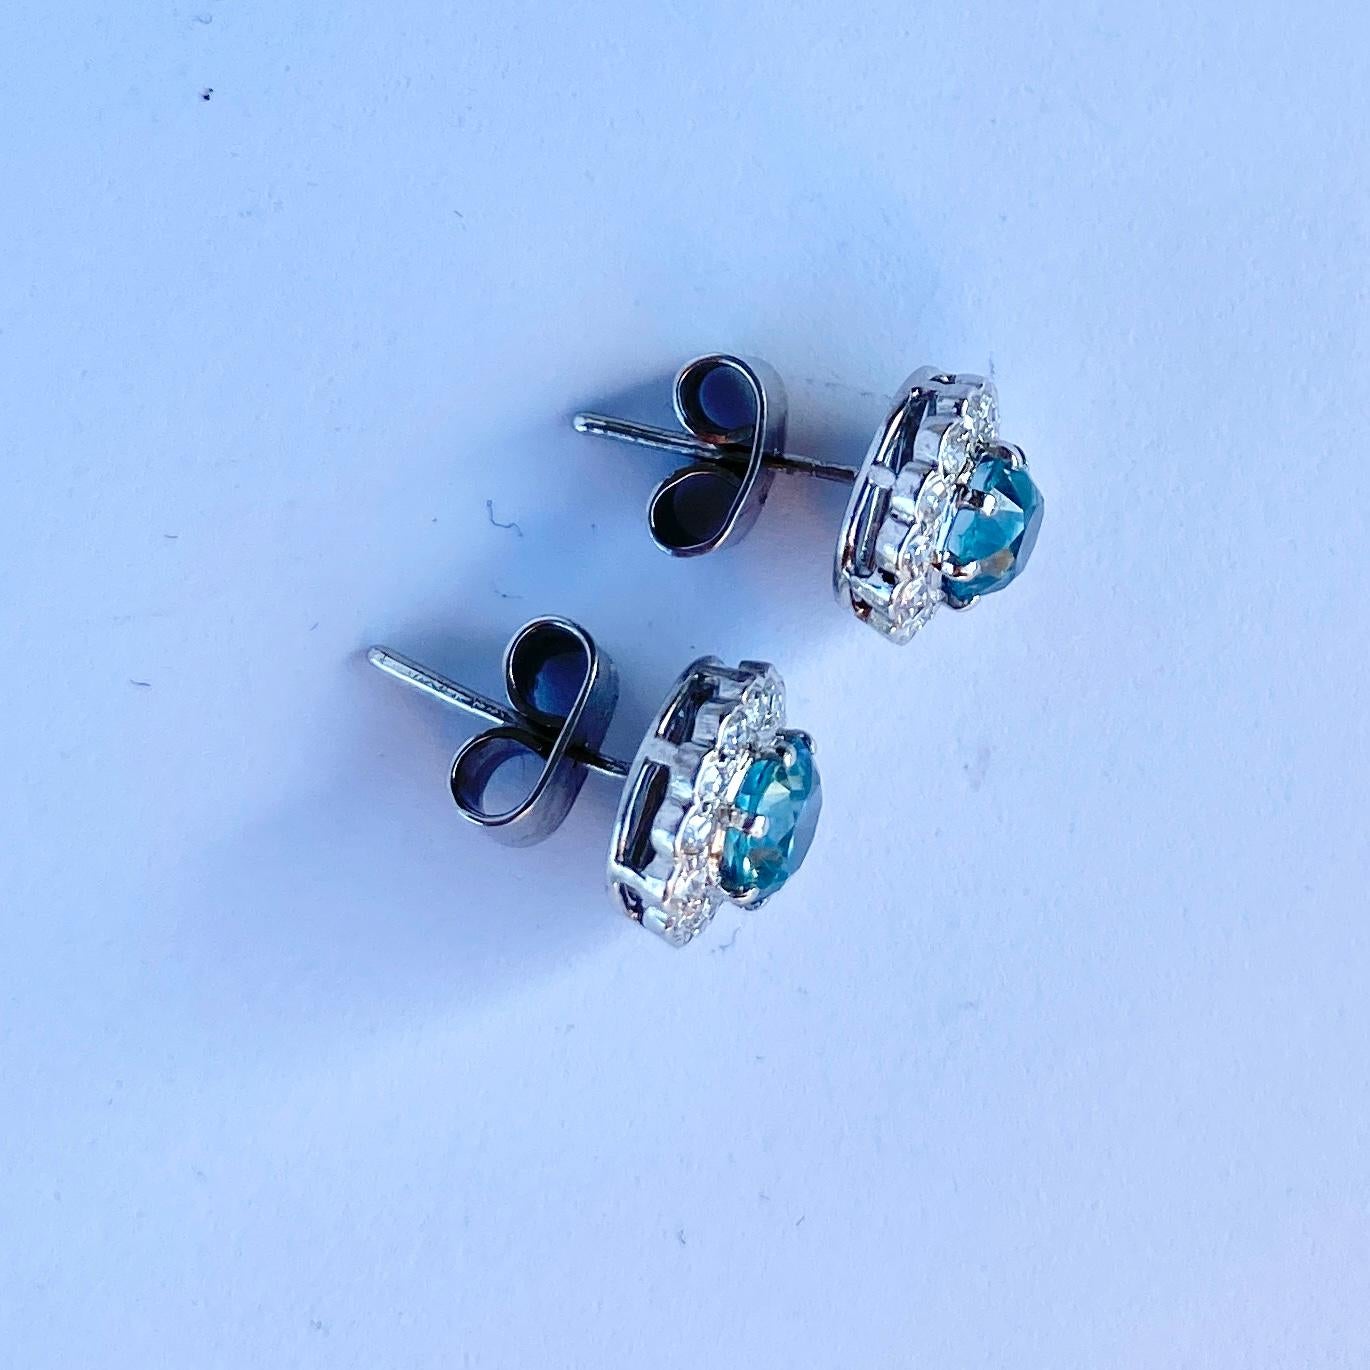 The gorgeous blue of these zircon stones is perfectly complimented by the halo of sparkling diamonds surrounding them. The zircon measures approximately 75pts each and the diamonds total 15pts per earring. 

Cluster Diameter: 9mm 

Weight: 3.3g